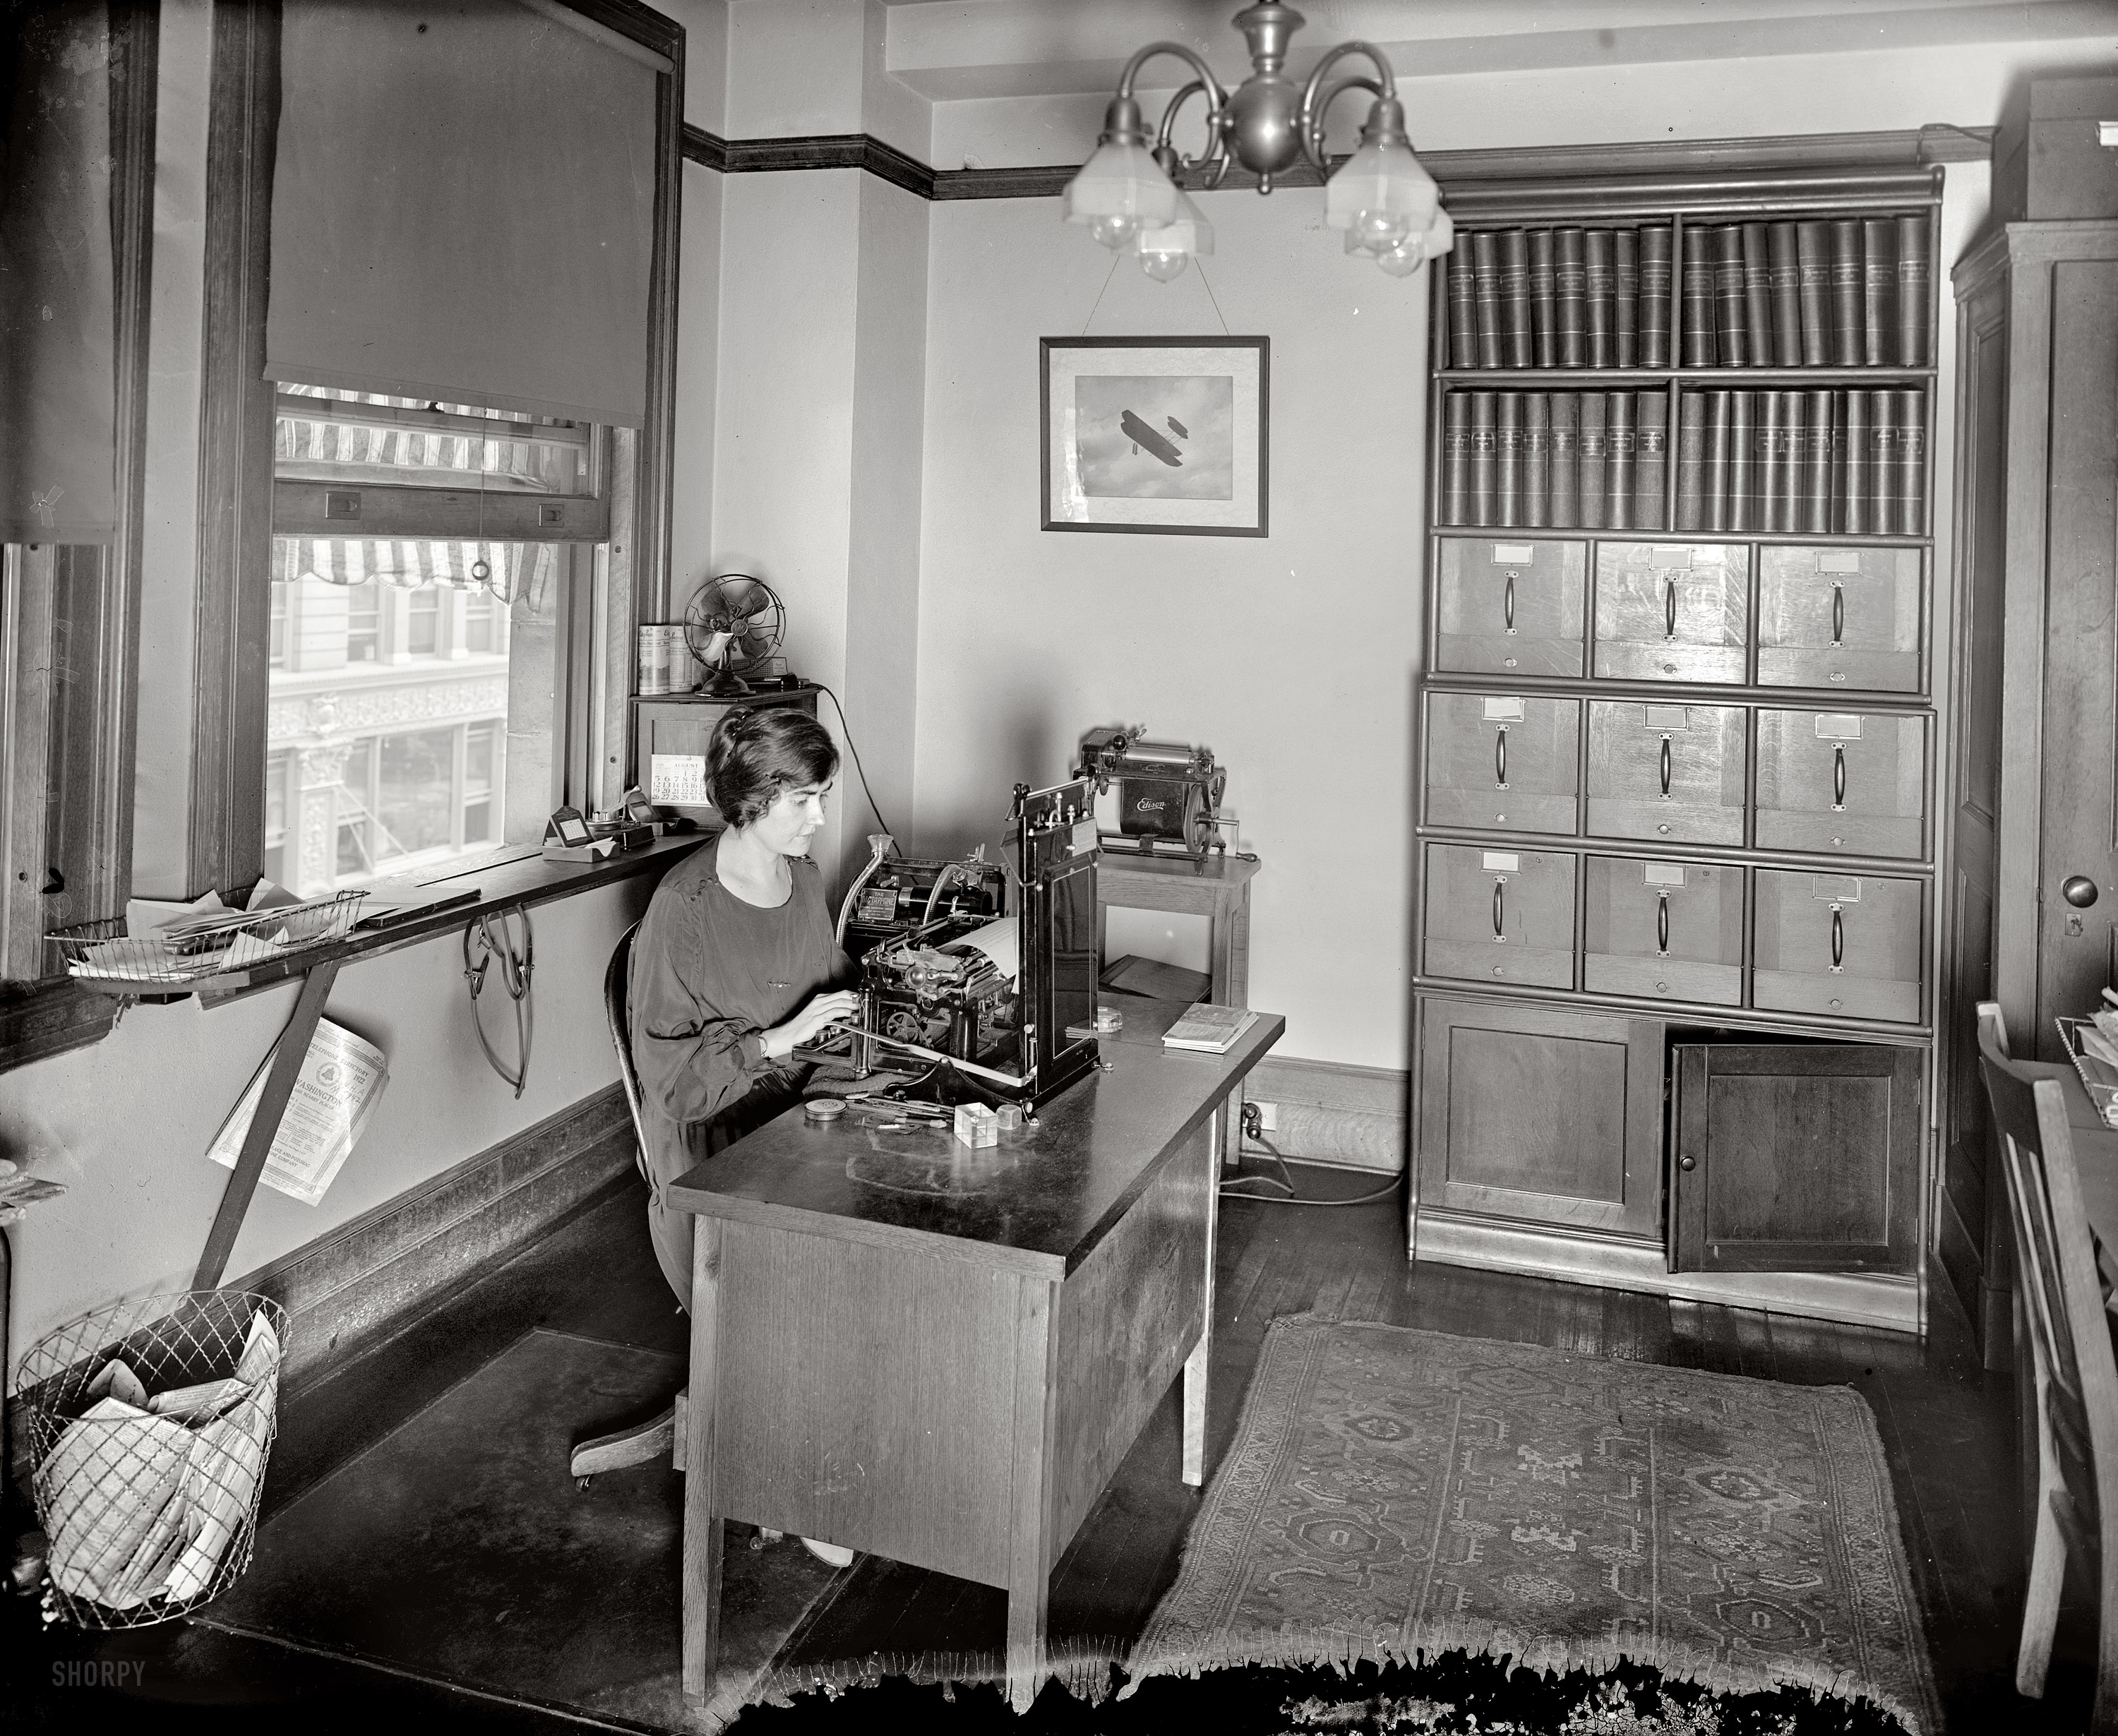 Washington, D.C., August 1923. "National Highways Association." An interesting variety of business machinery on display here including a Dictaphone and some Ediphone cylinders. National Photo Company glass negative. View full size.